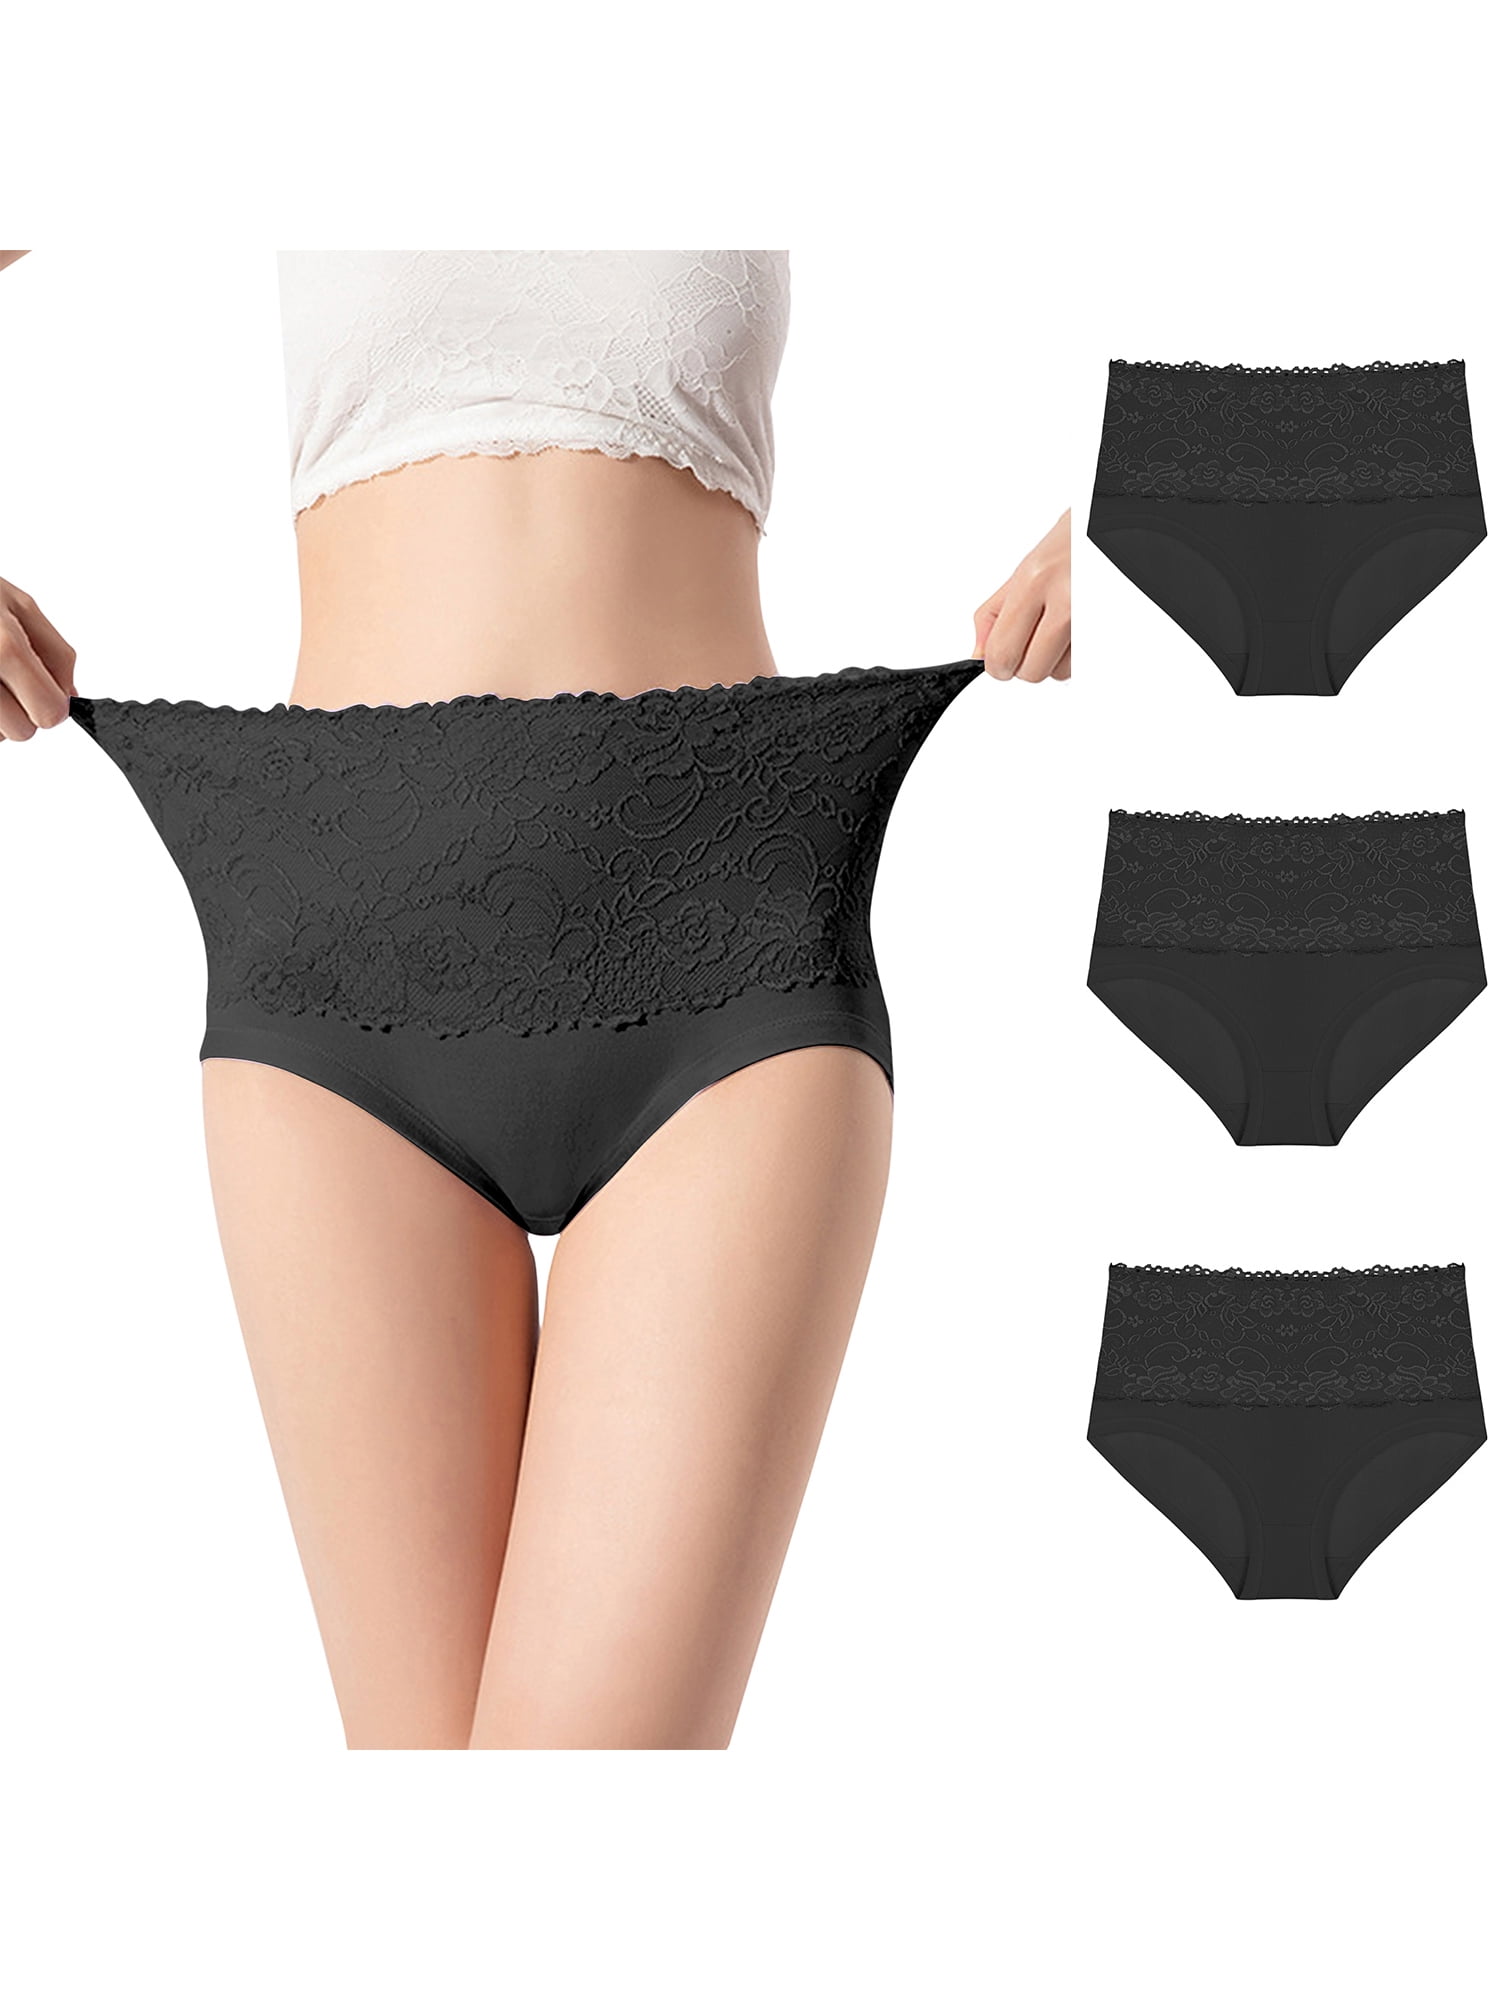 Sehao High Rise Underwear Women Women's Lace Briefs Lingerie Knickers  G-string Thongs Panties Underwear WH Spandex Lace Thong Plus Size Panties 